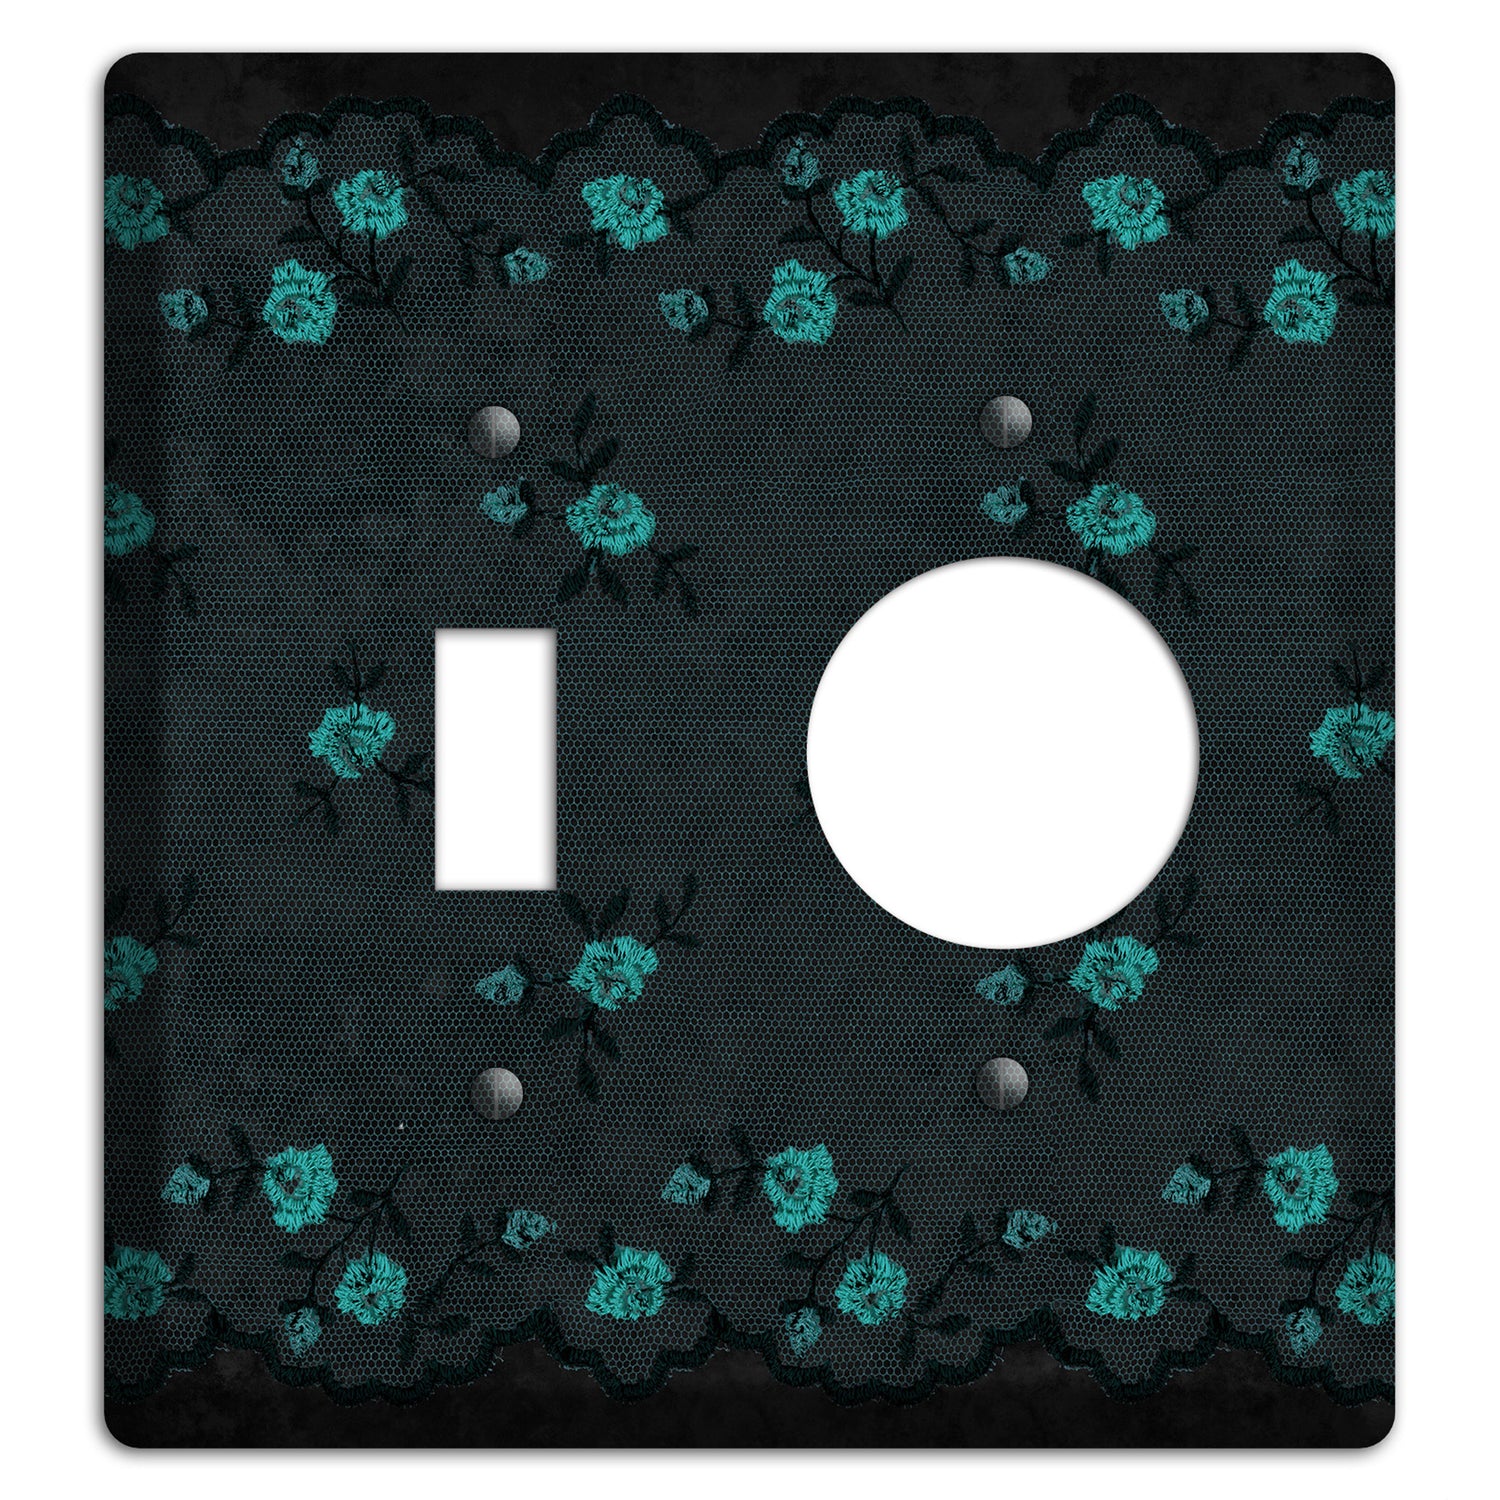 Embroidered Floral Black Toggle / Receptacle Wallplate